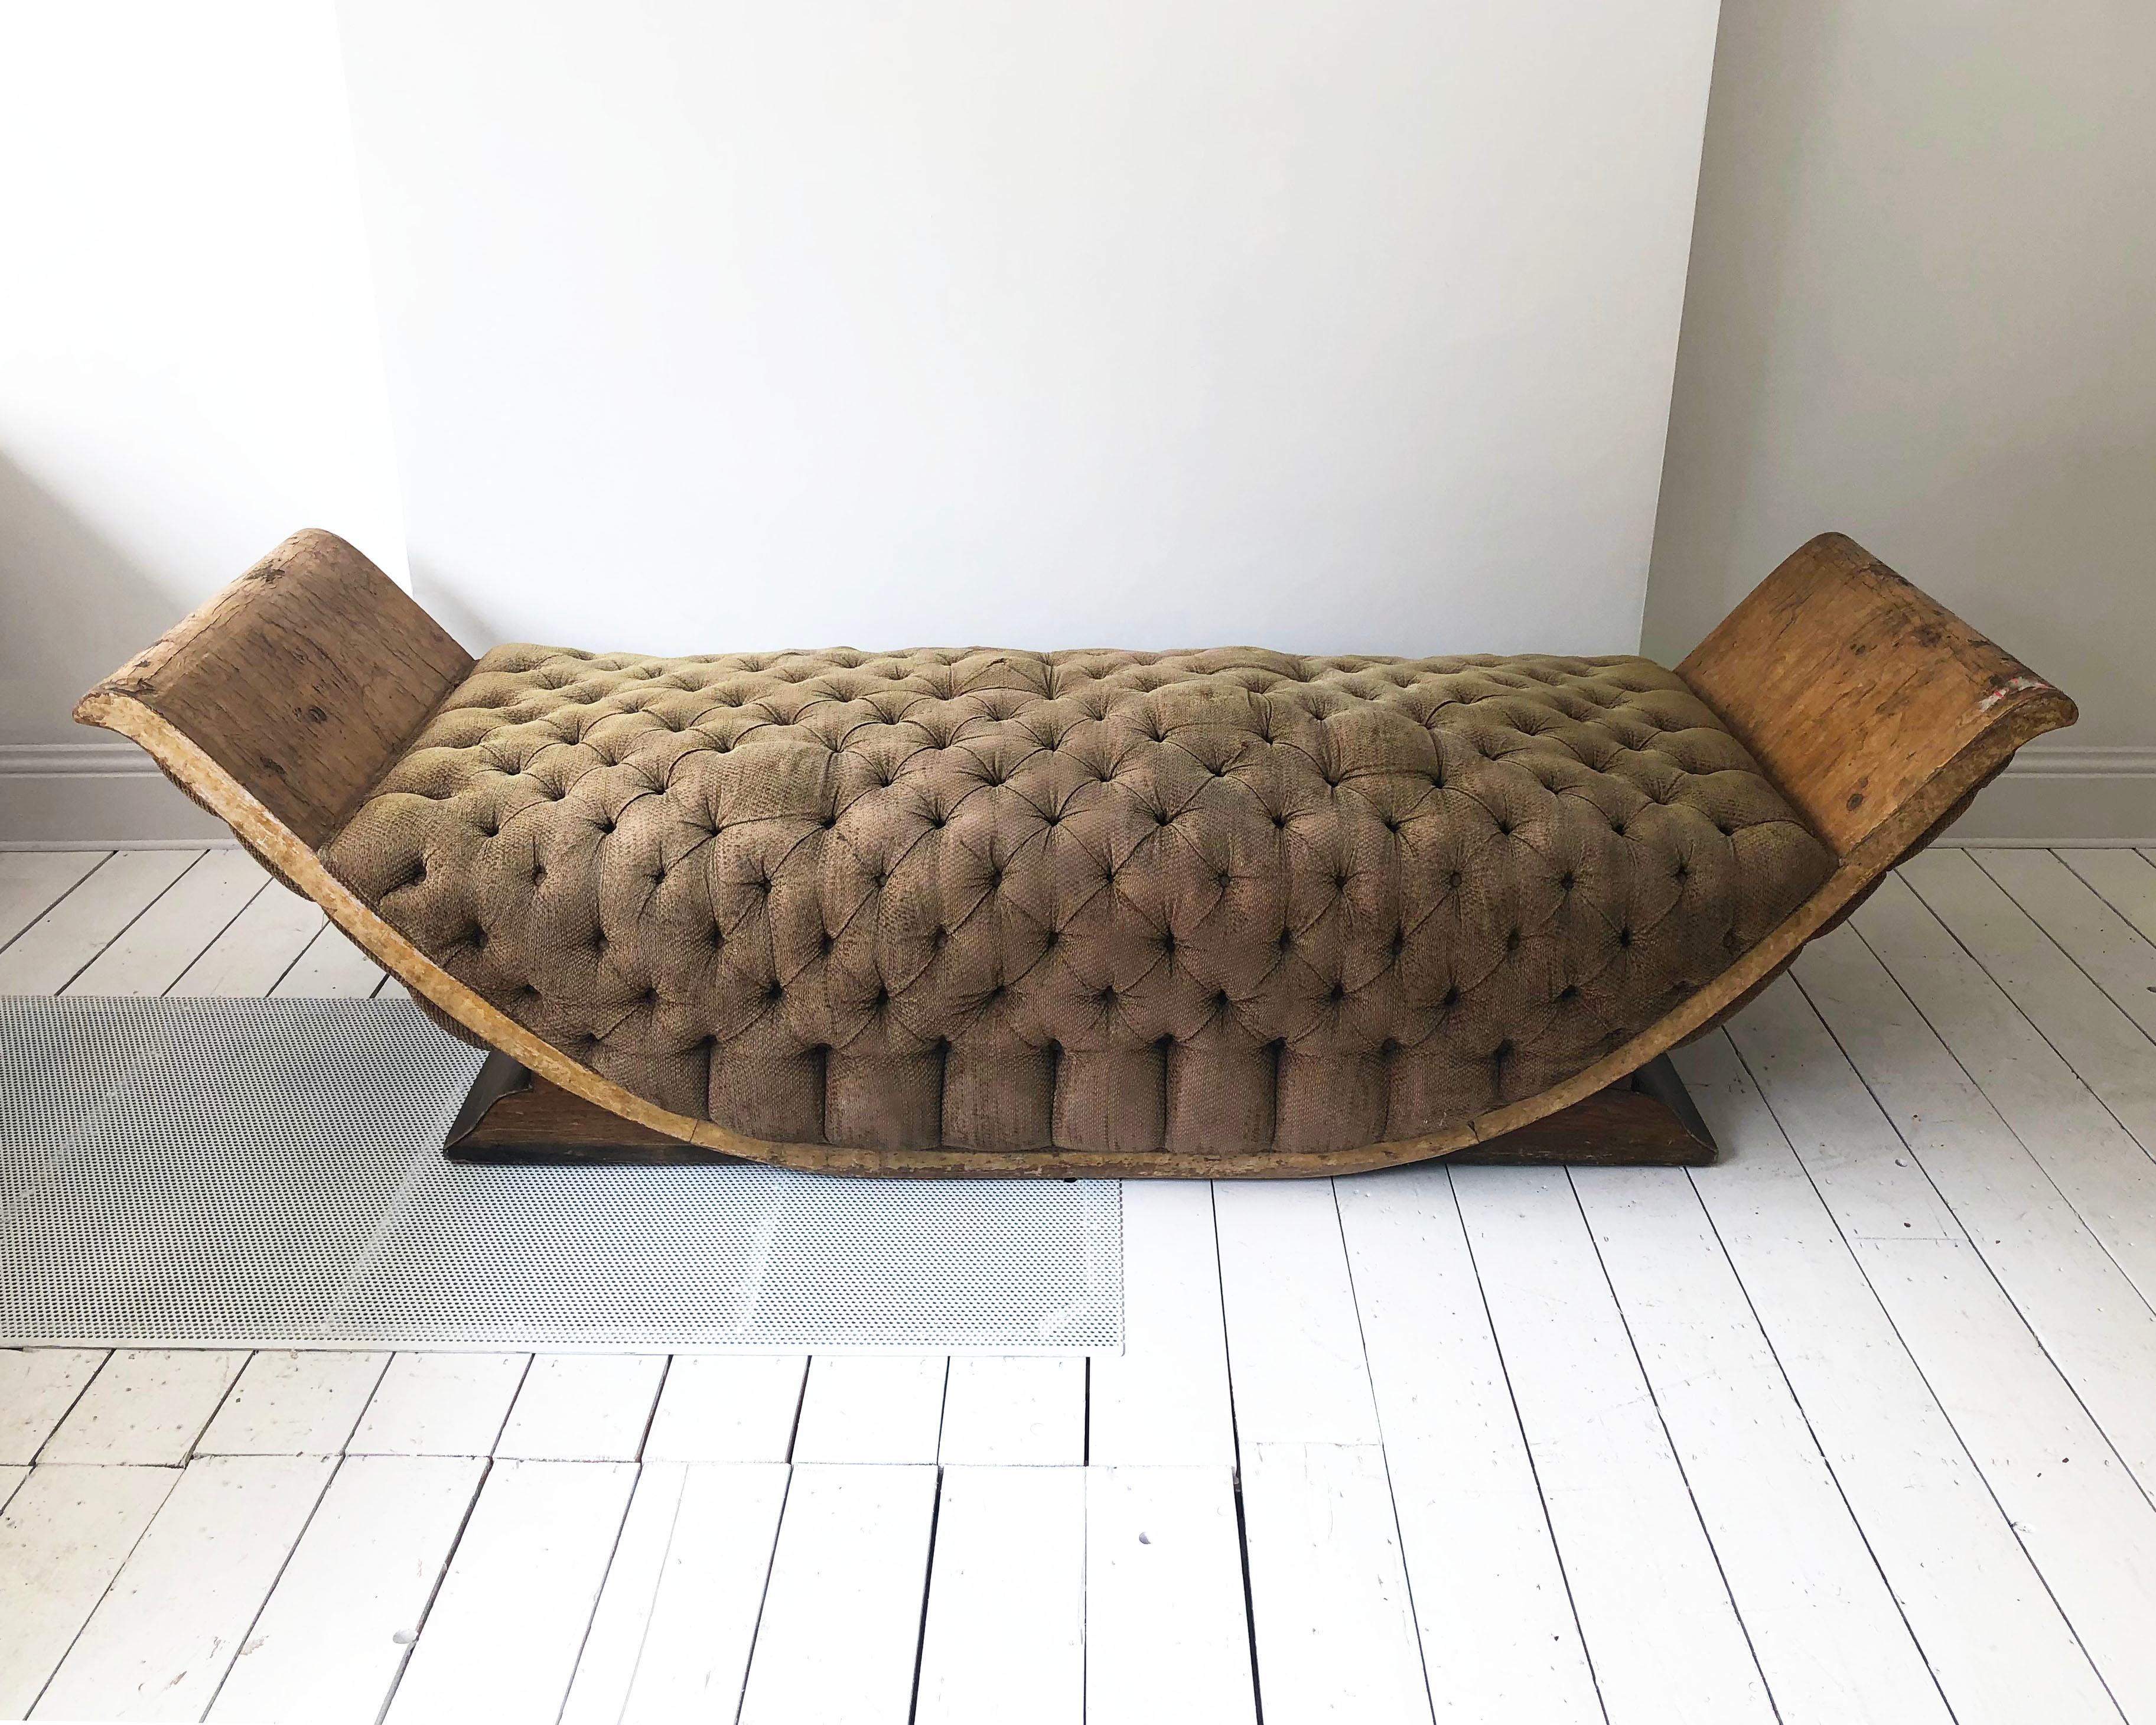 A unique 1930s Art Deco chaise lounge in the shape of gondola made out of burl walnut veneer and buttoned brown upholstery. The daybed talks history with its distressed look which shows its age and use over the decades but its very a comfortable